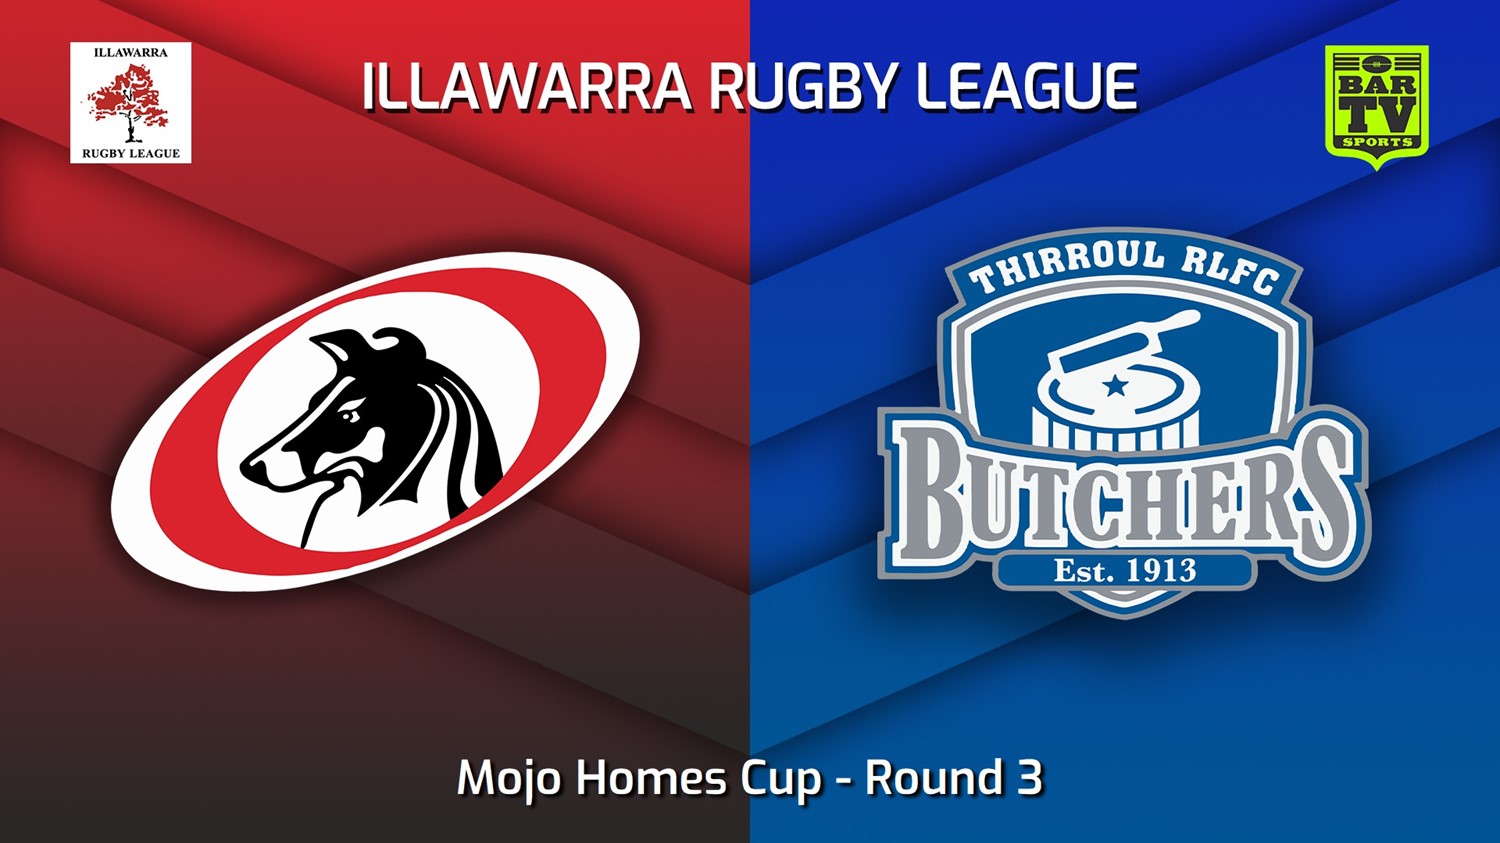 230513-Illawarra Round 3 - Mojo Homes Cup - Collegians v Thirroul Butchers Minigame Slate Image